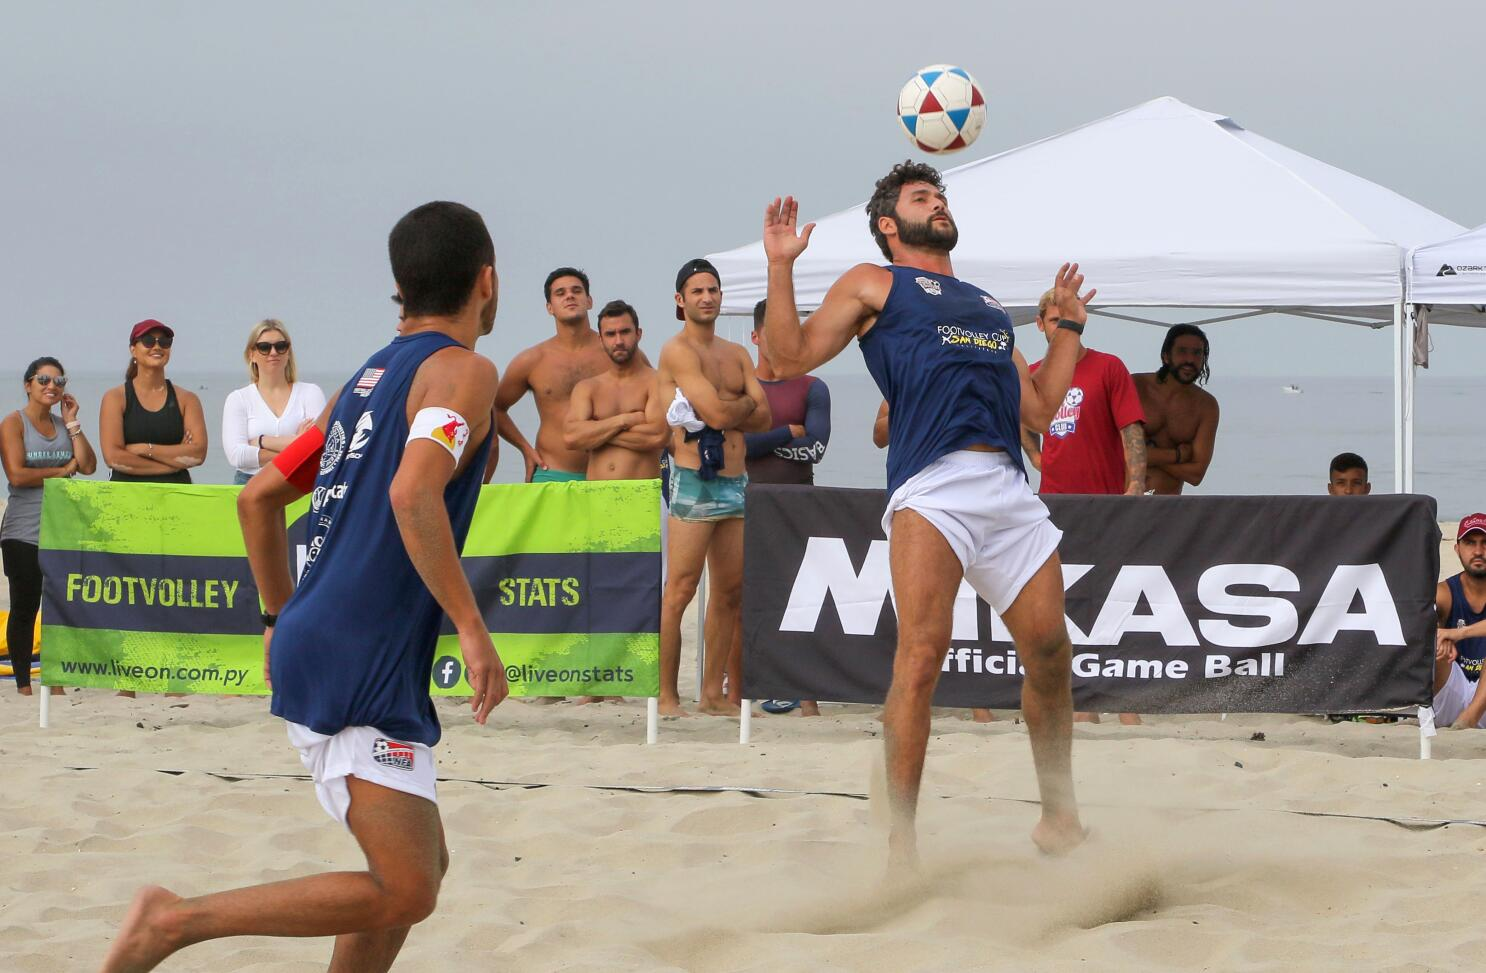 brazilians playing footvolley